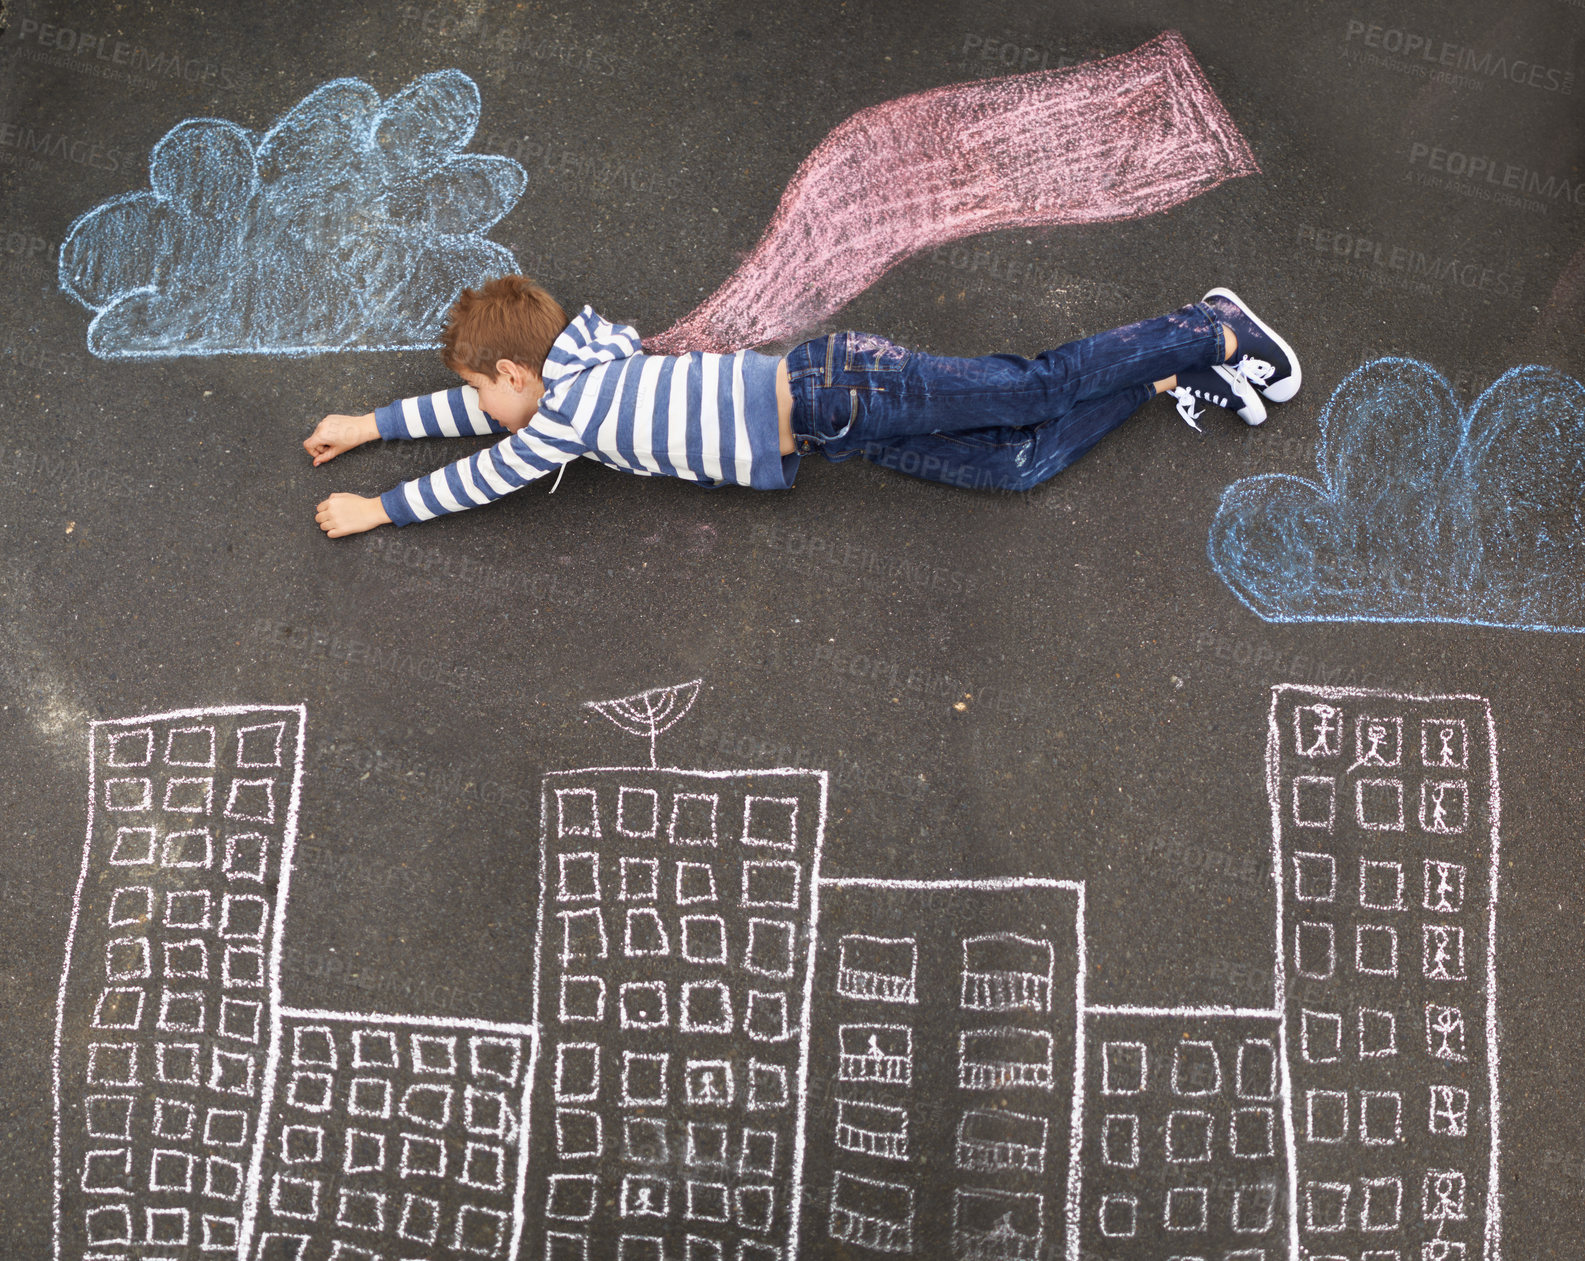 Buy stock photo Top view of a young boy using chalk and imagination to create his own world